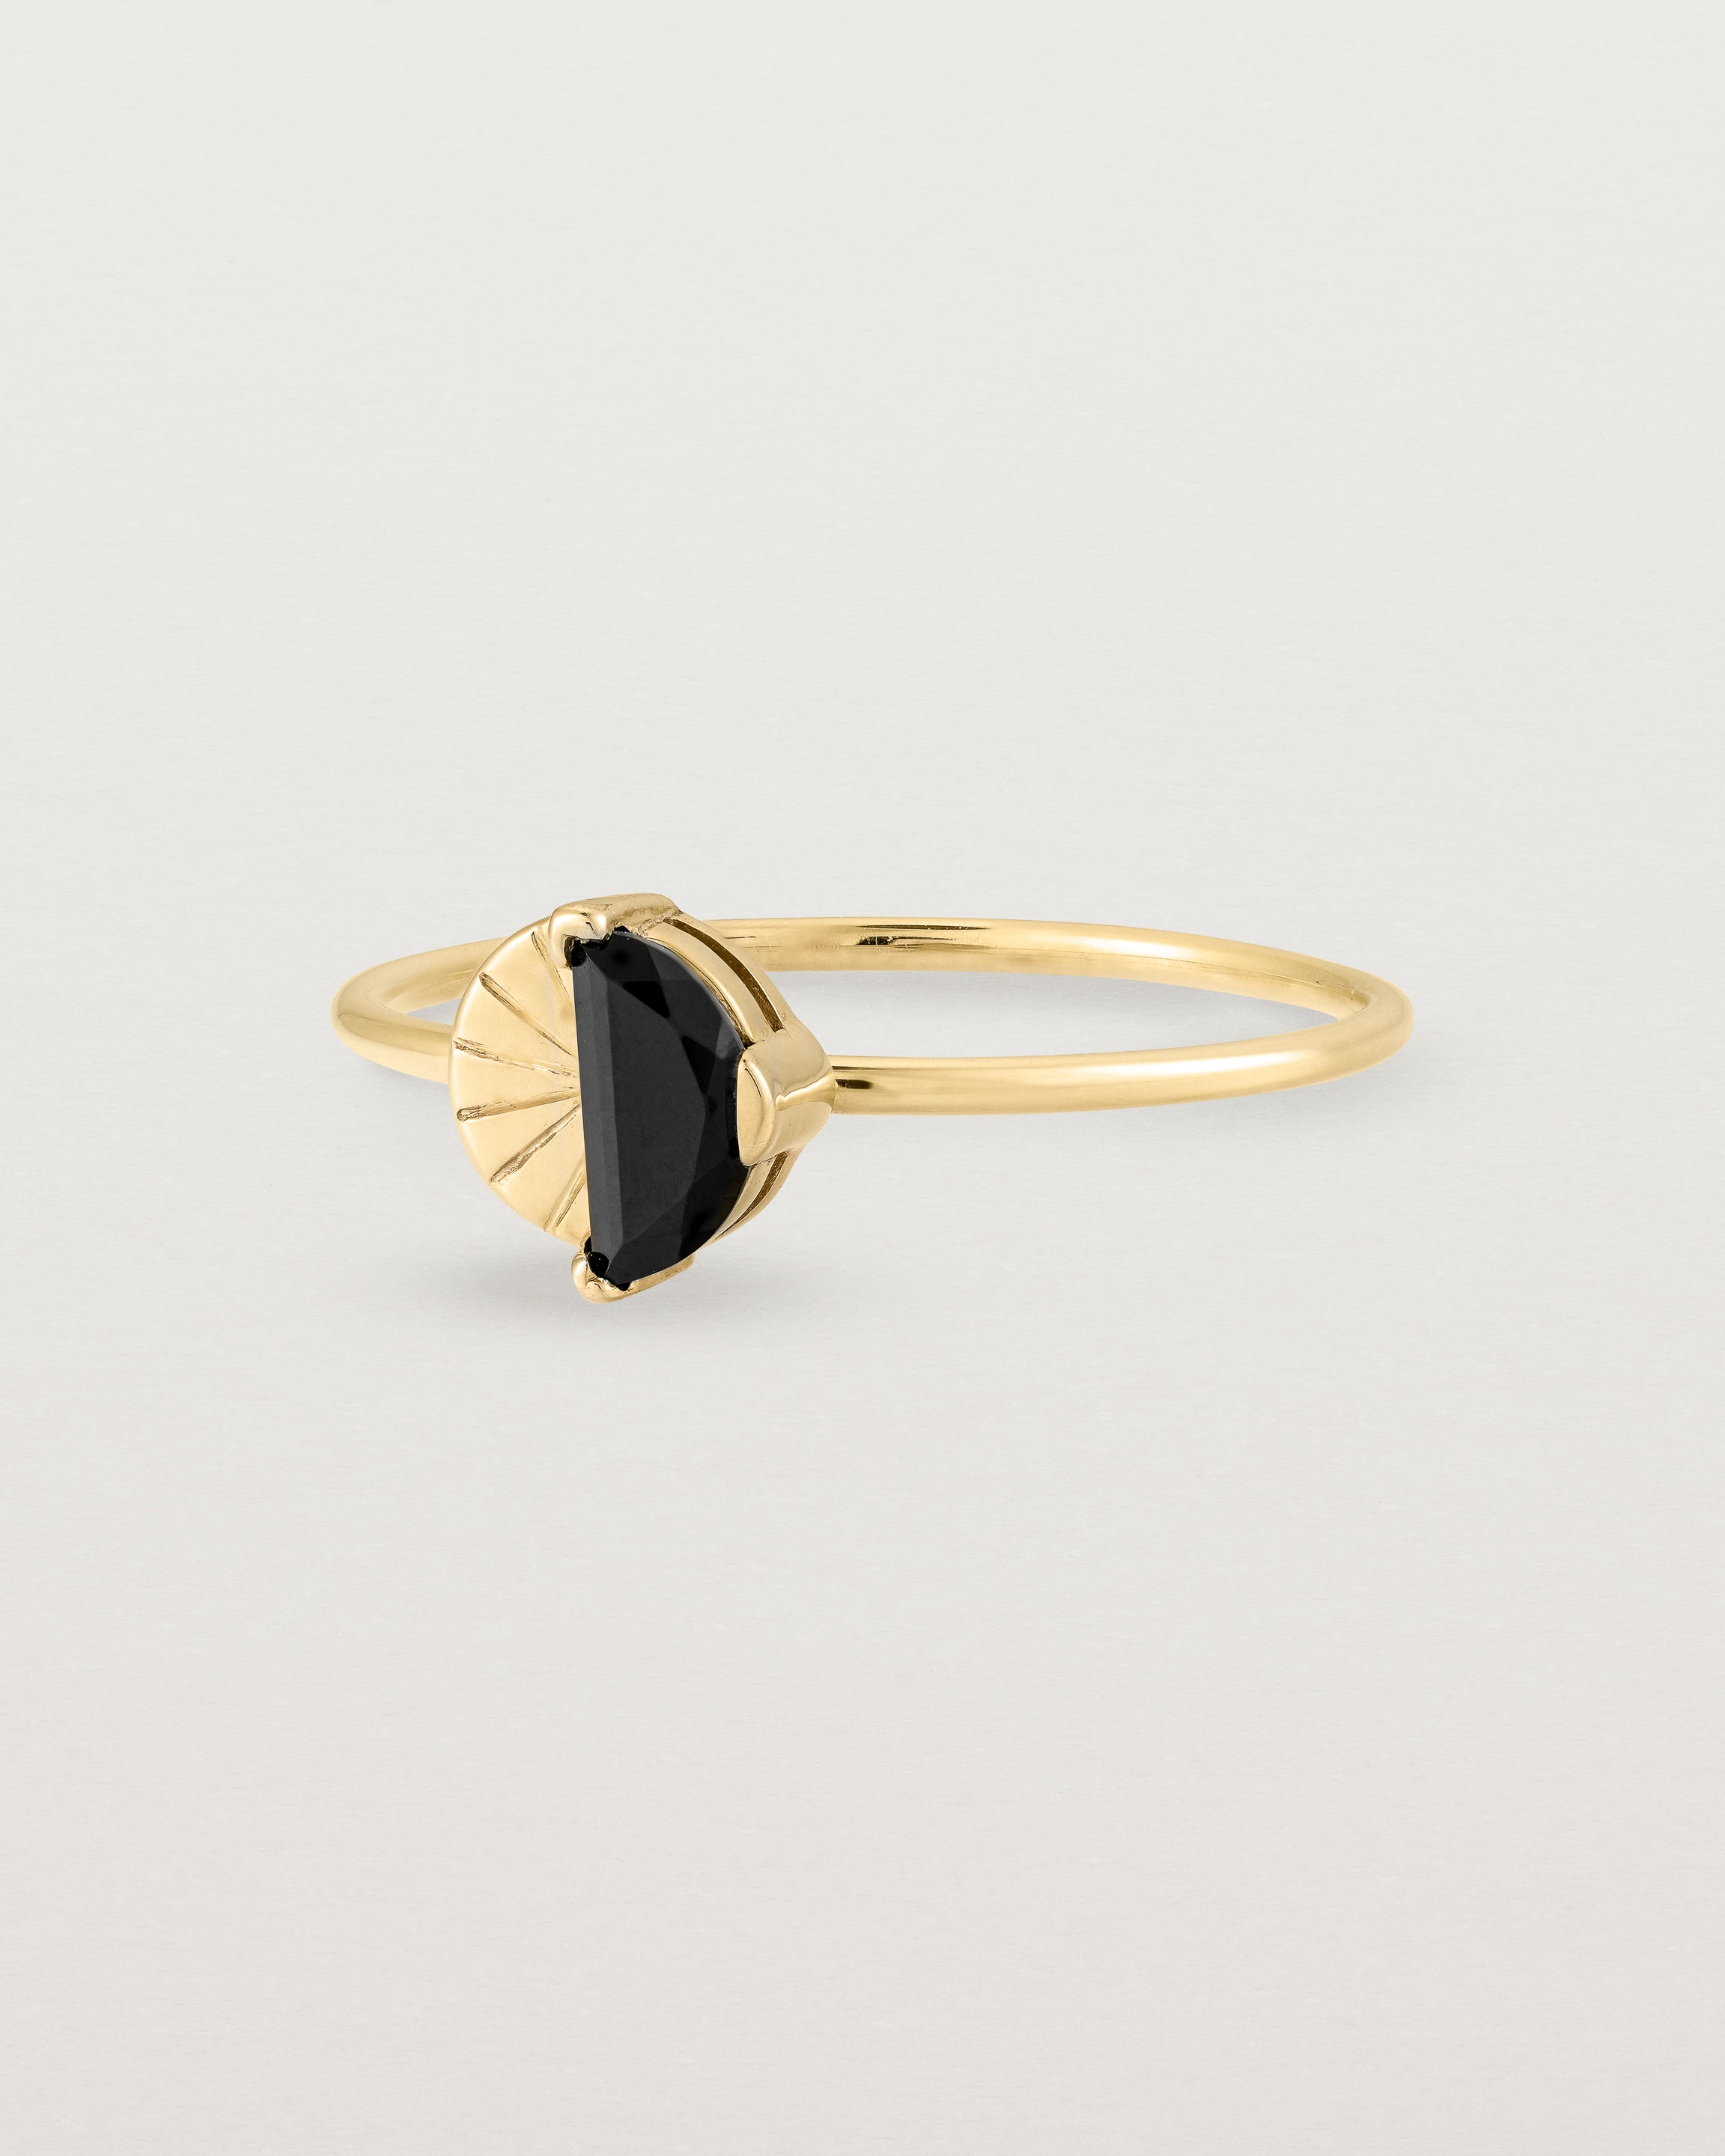 Angled view of the Jia Stone Ring | Black Spinel in Yellow Gold.